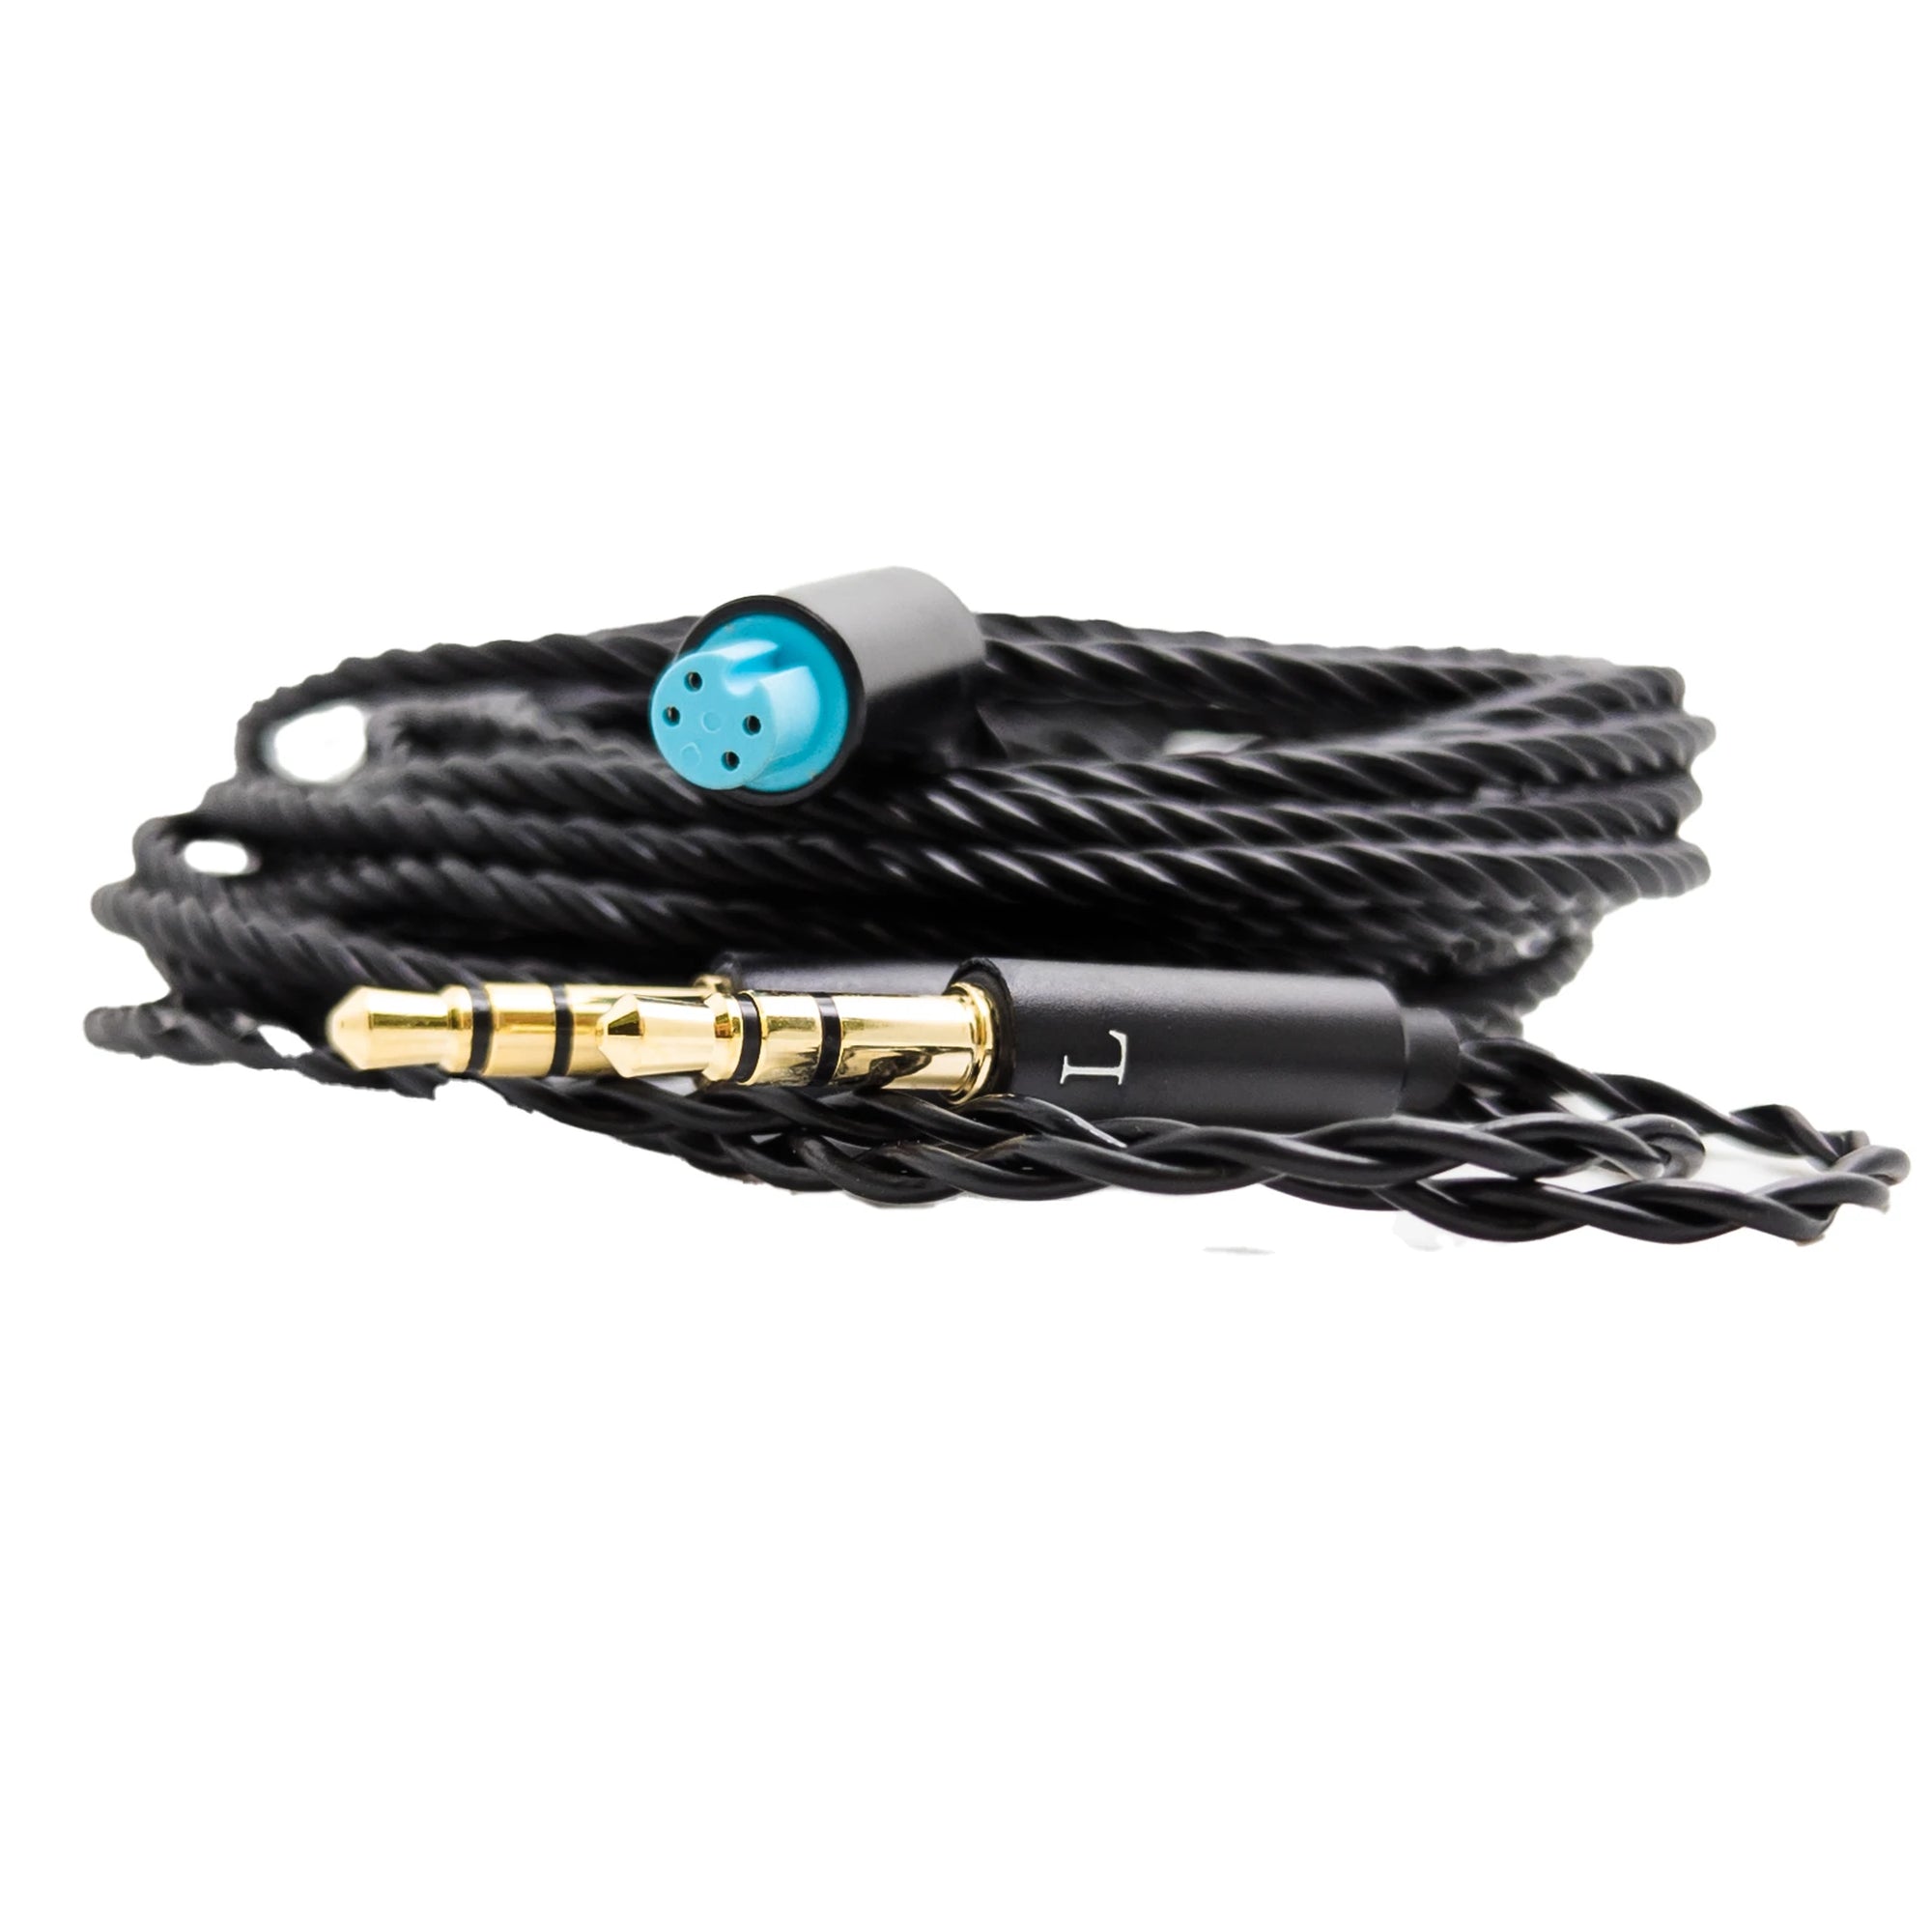 Replacement Cable For Hifiman Headphones with Modular Plugs